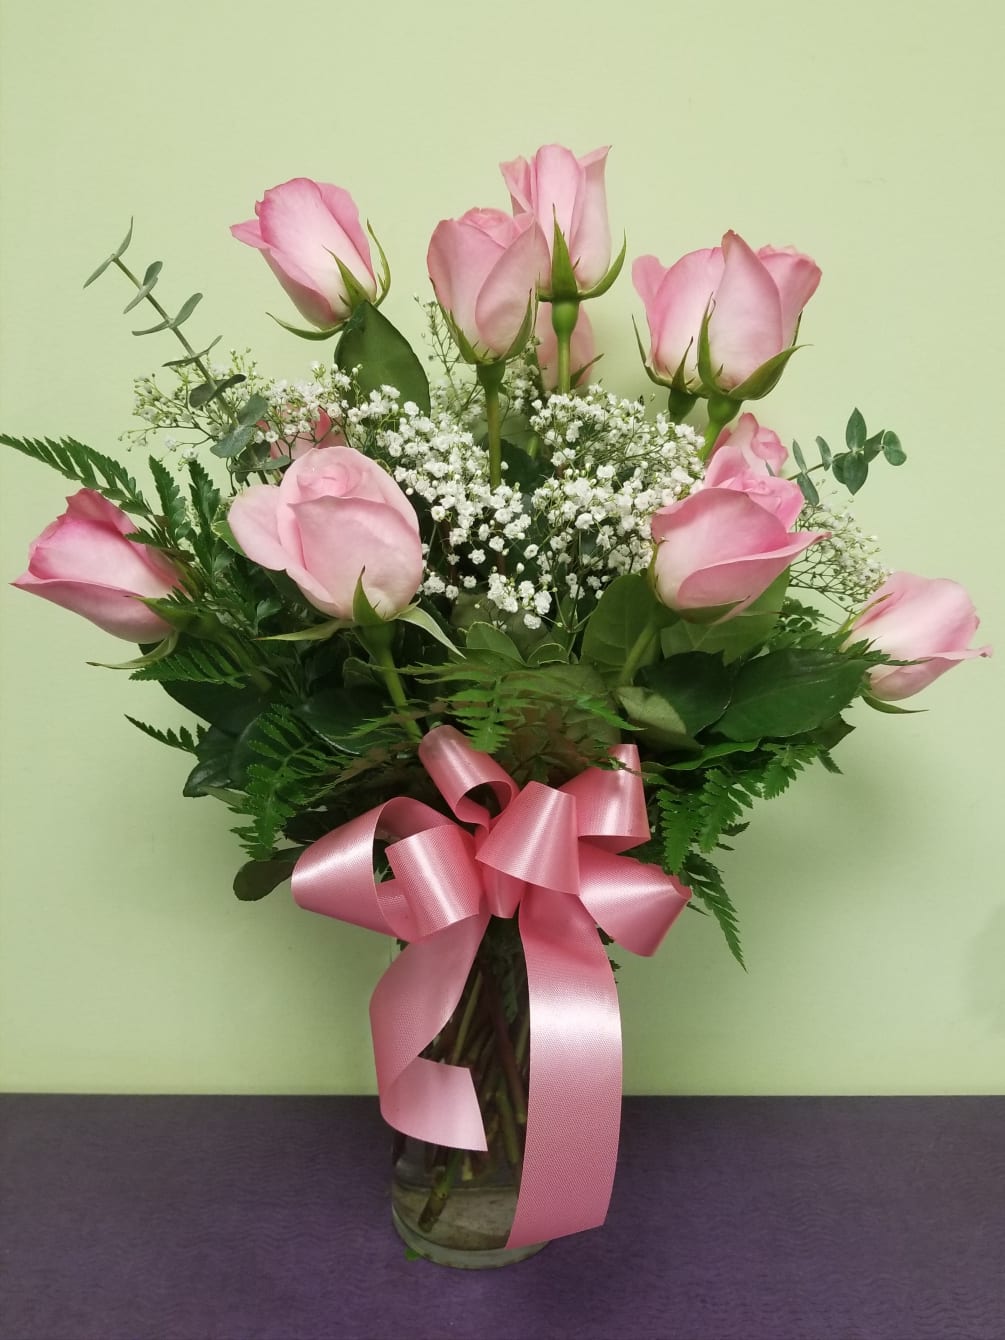 Twelve, beautiful, perfect Roses are arranged in a crystal clear glass vase.